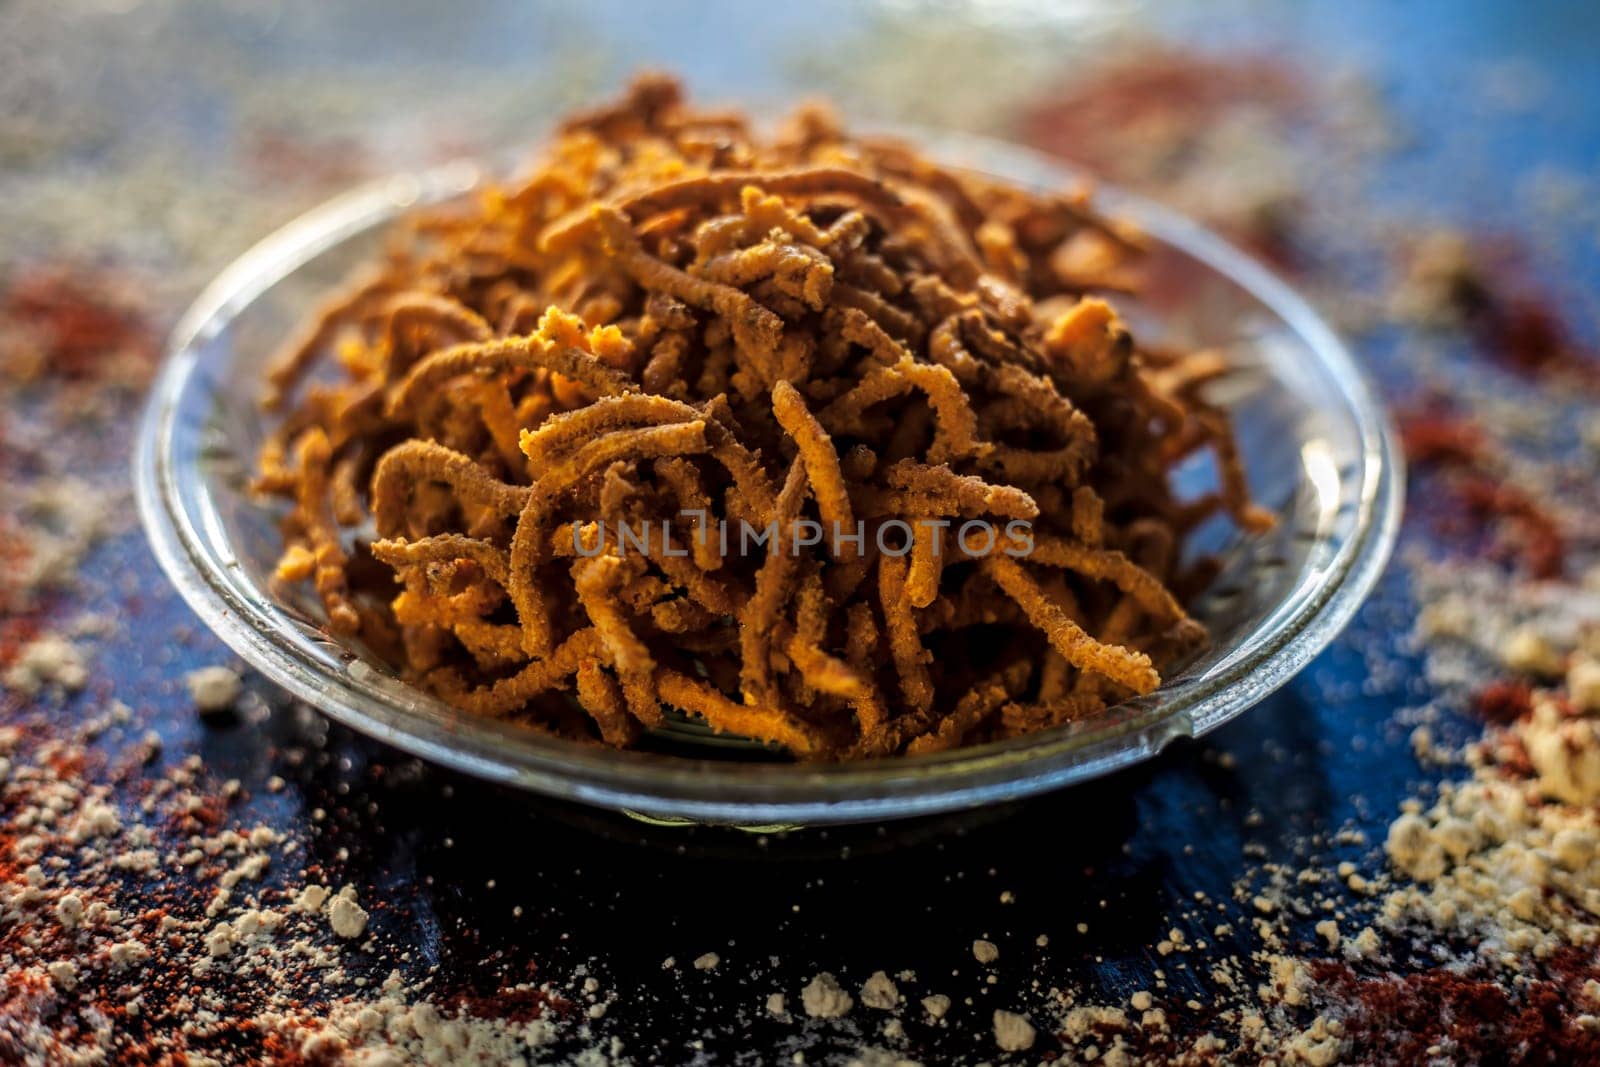 Diwali and Shravan Som special Teekha Gathiya in a glass plate along with some spread chickpea flour, red chili powder, and other ingredients that are needed to make the snack on a black surface. by mirzamlk